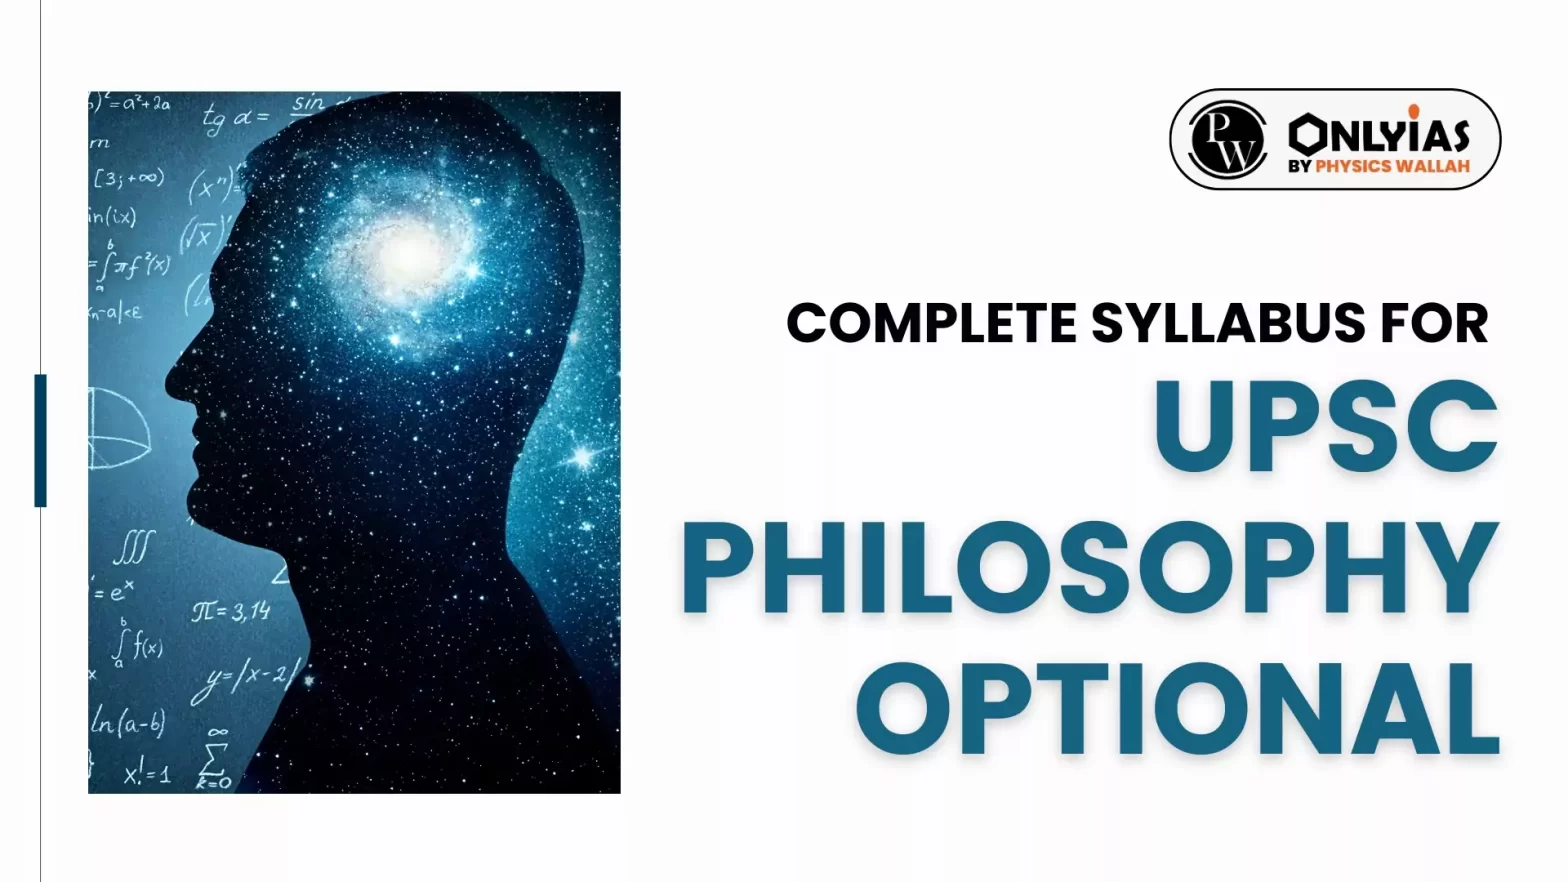 Complete Syllabus For UPSC Philosophy Optional